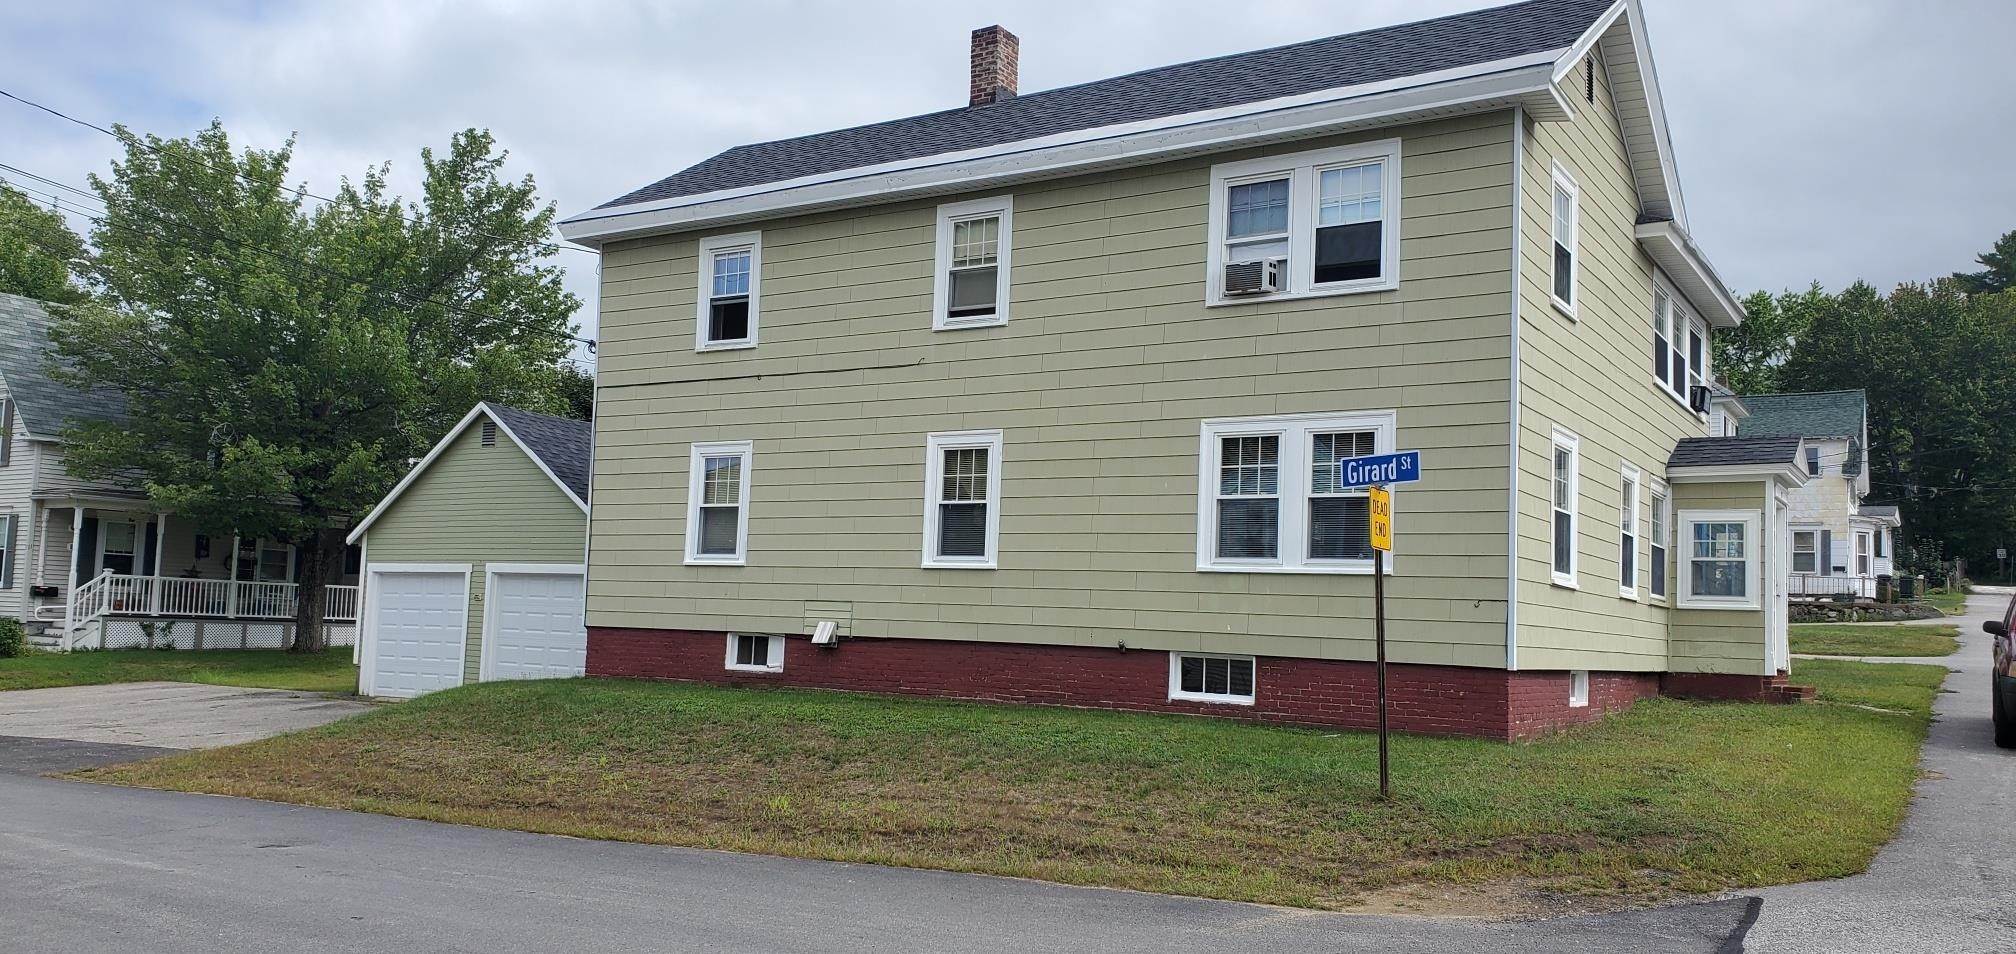 4. Multi Family for Sale at Laconia, NH 03246